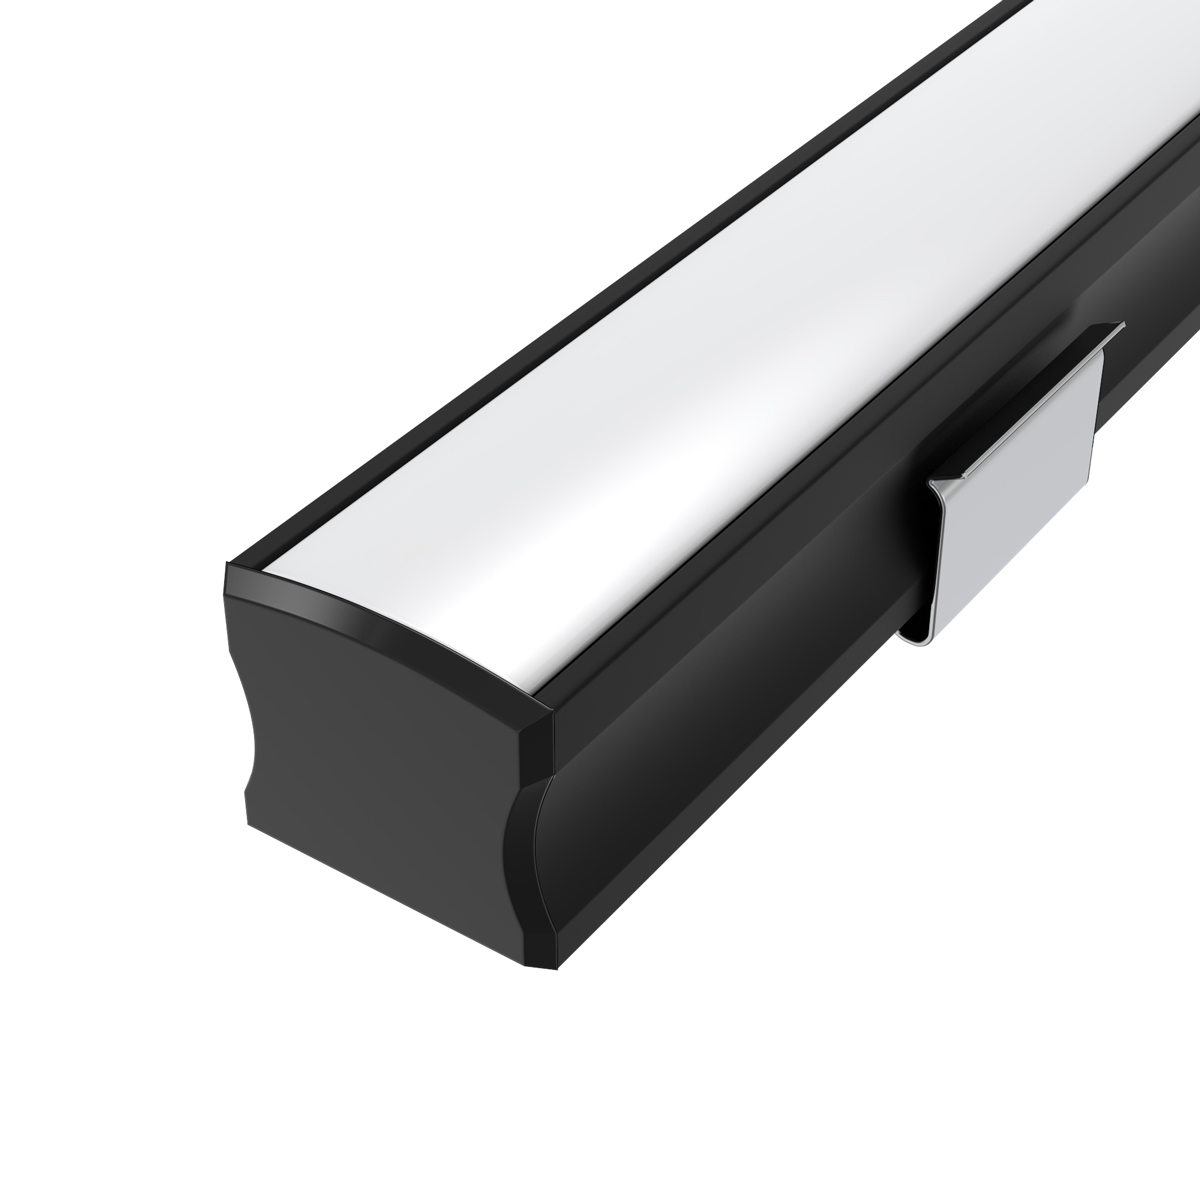 View 2m Black 15mm Aluminium LED Profile Includes Frosted Cover information